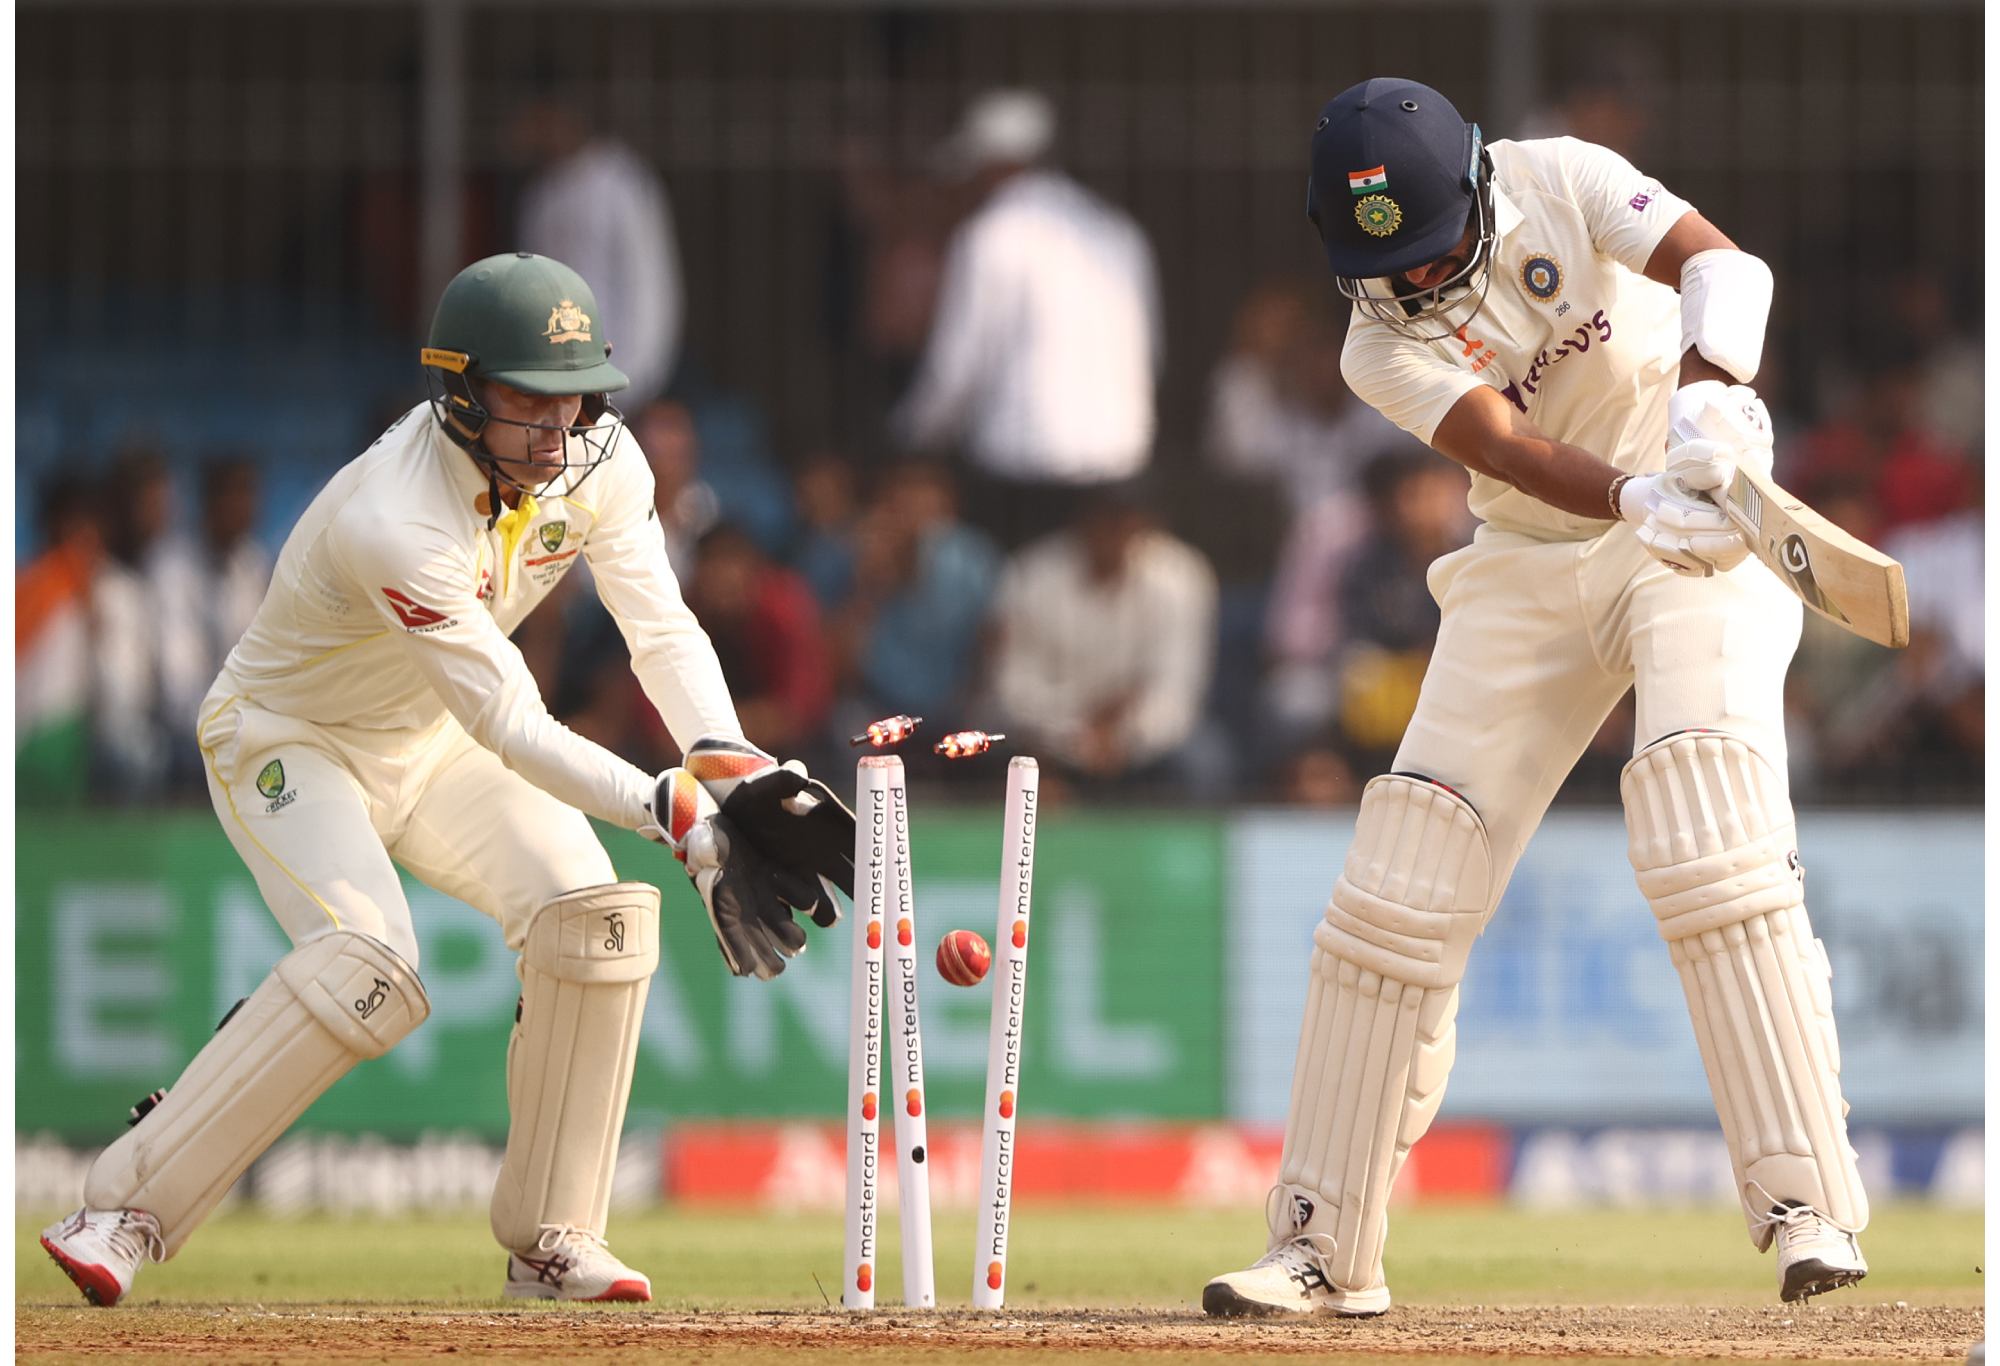 INDORE, INDIA - MARCH 1: Cheteshwar Pujara of India is bowled by Nathan Lyon of Australia during the first day of the third Test match in the series between India and Australia at Holkare Cricket Stadium on March 1, 2023 in Indore, India. (Photo by Robert Cianflone/Getty Images)